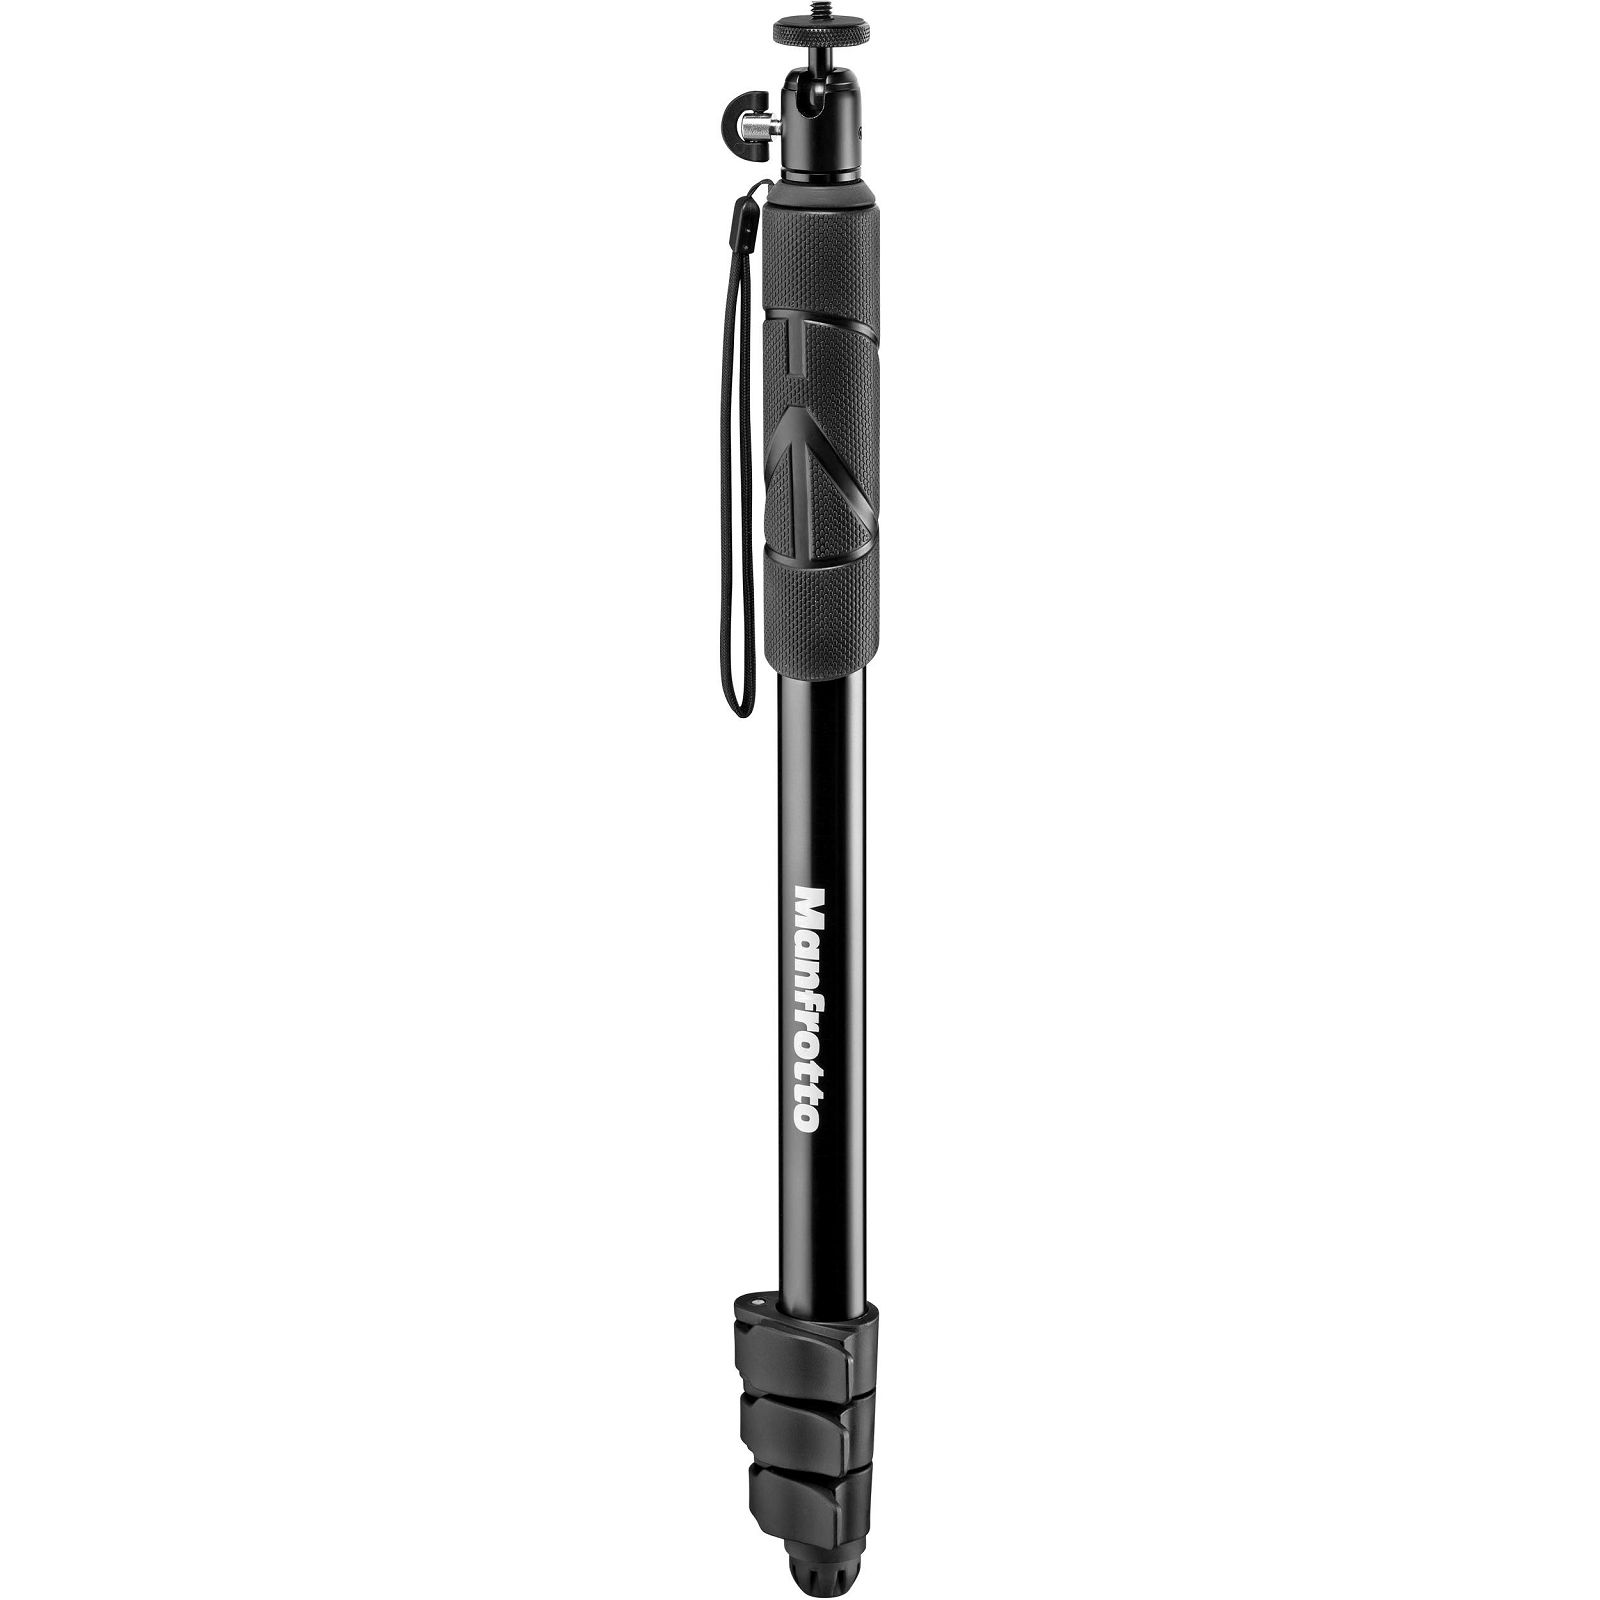 Manfrotto MPCOMPACT-BK 131cm 1kg Black Compact Extreme 2-in-1 Monopod and Pole selfie stick